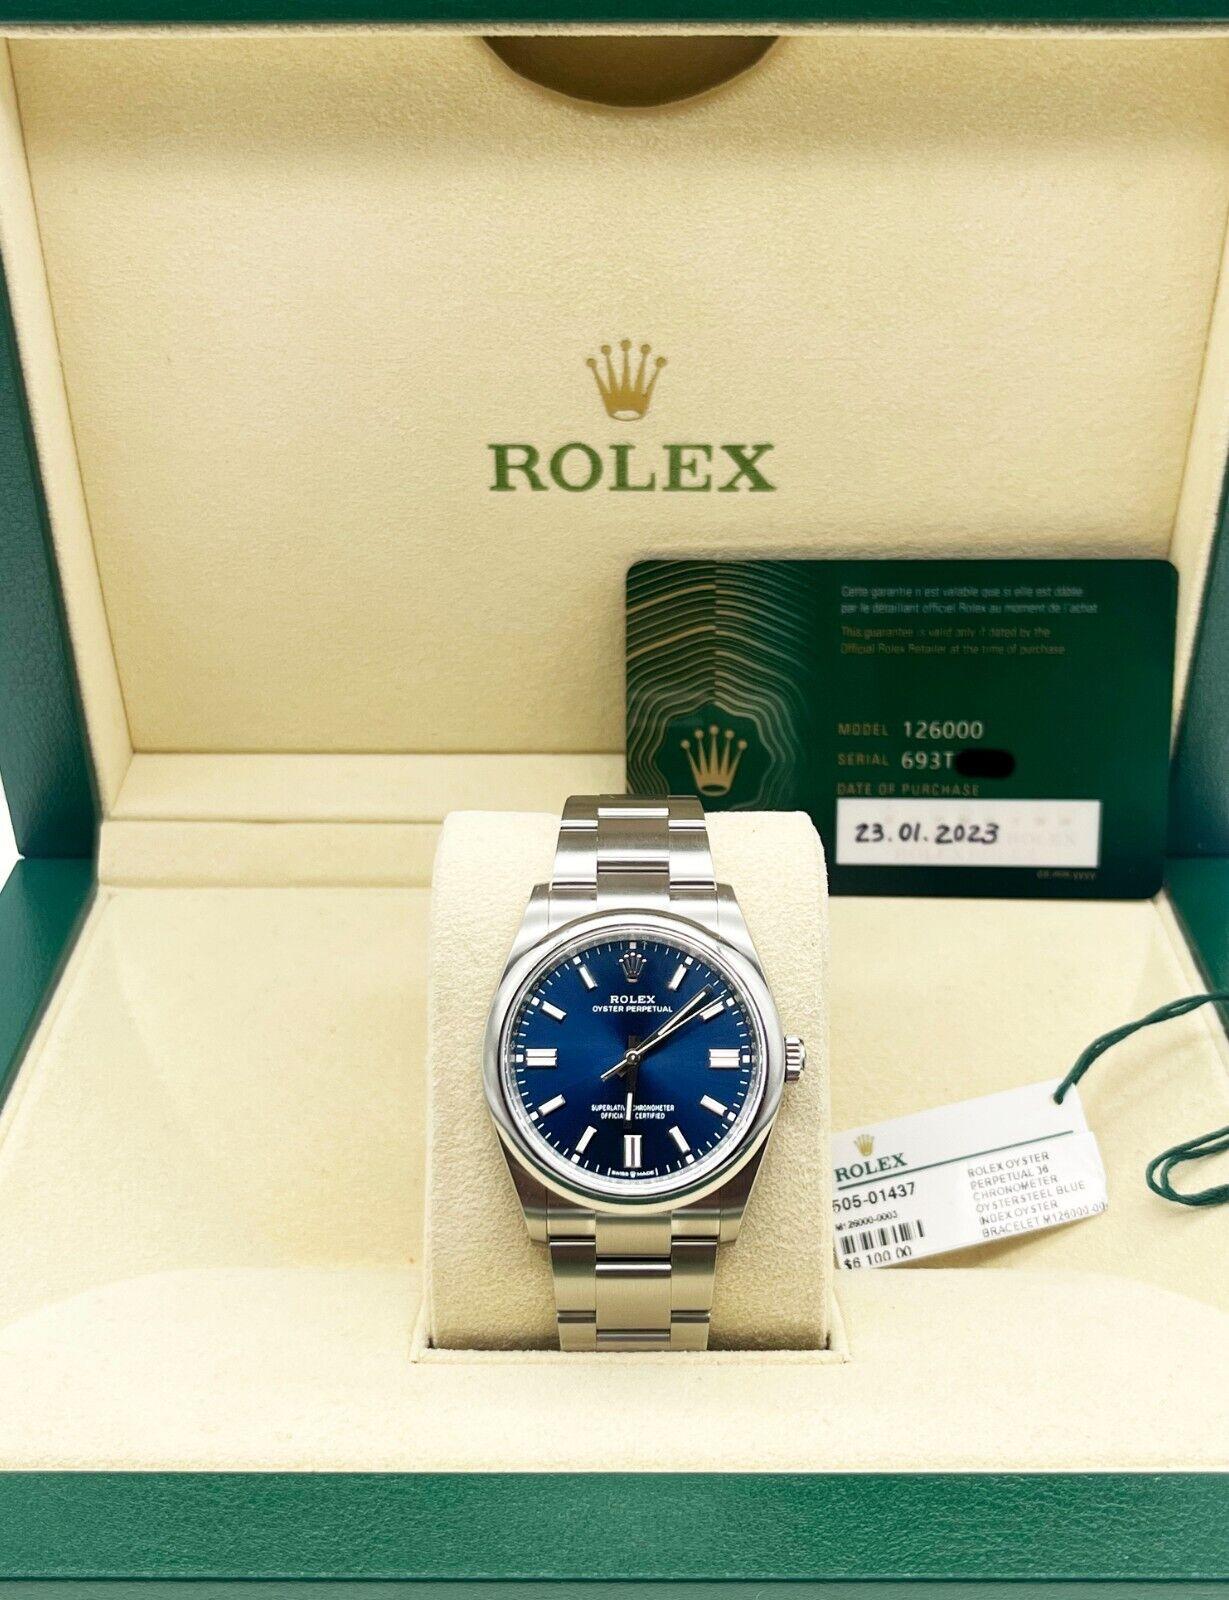 Style Number: 126000

Serial: 693T2***

Year: 2023

Model: Oyster Perpetual

Case Material: Stainless Steel 

Band: Stainless Steel 

Bezel: Stainless Steel 

Dial: Blue

Face: Sapphire Crystal 

Case Size: 36mm

 Includes: 

-Rolex Box &